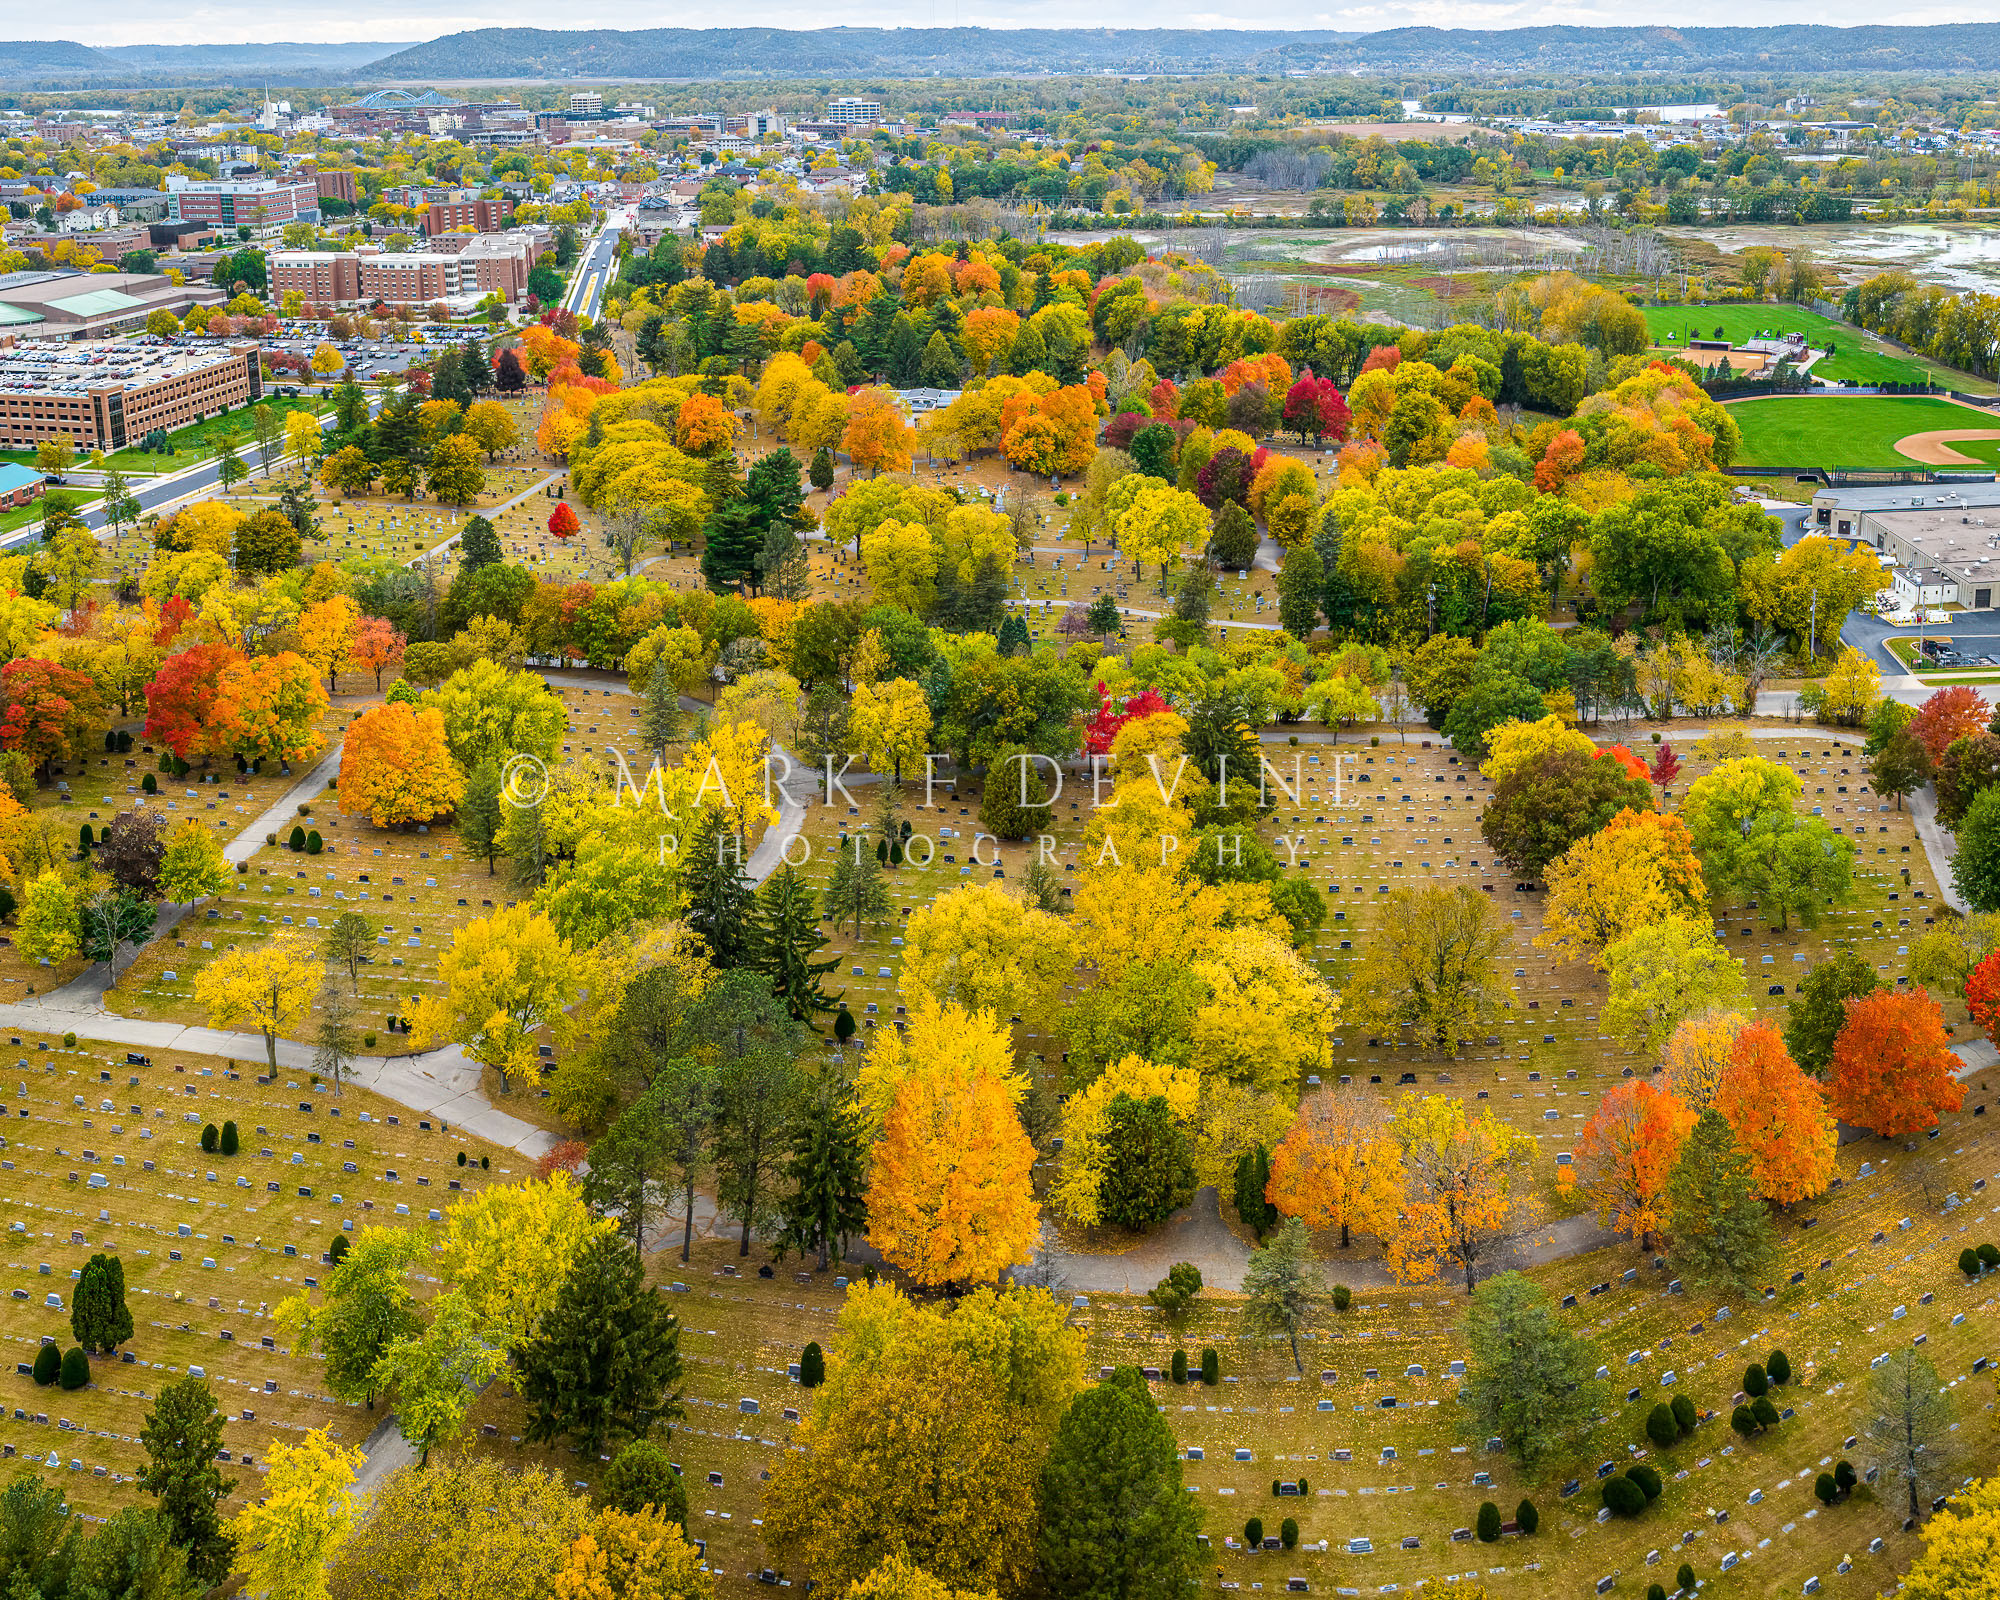 On this particular autumn day Oak Grove Cemetery was arguably the most colorful spot in La Crosse. This panoramic aerial view...